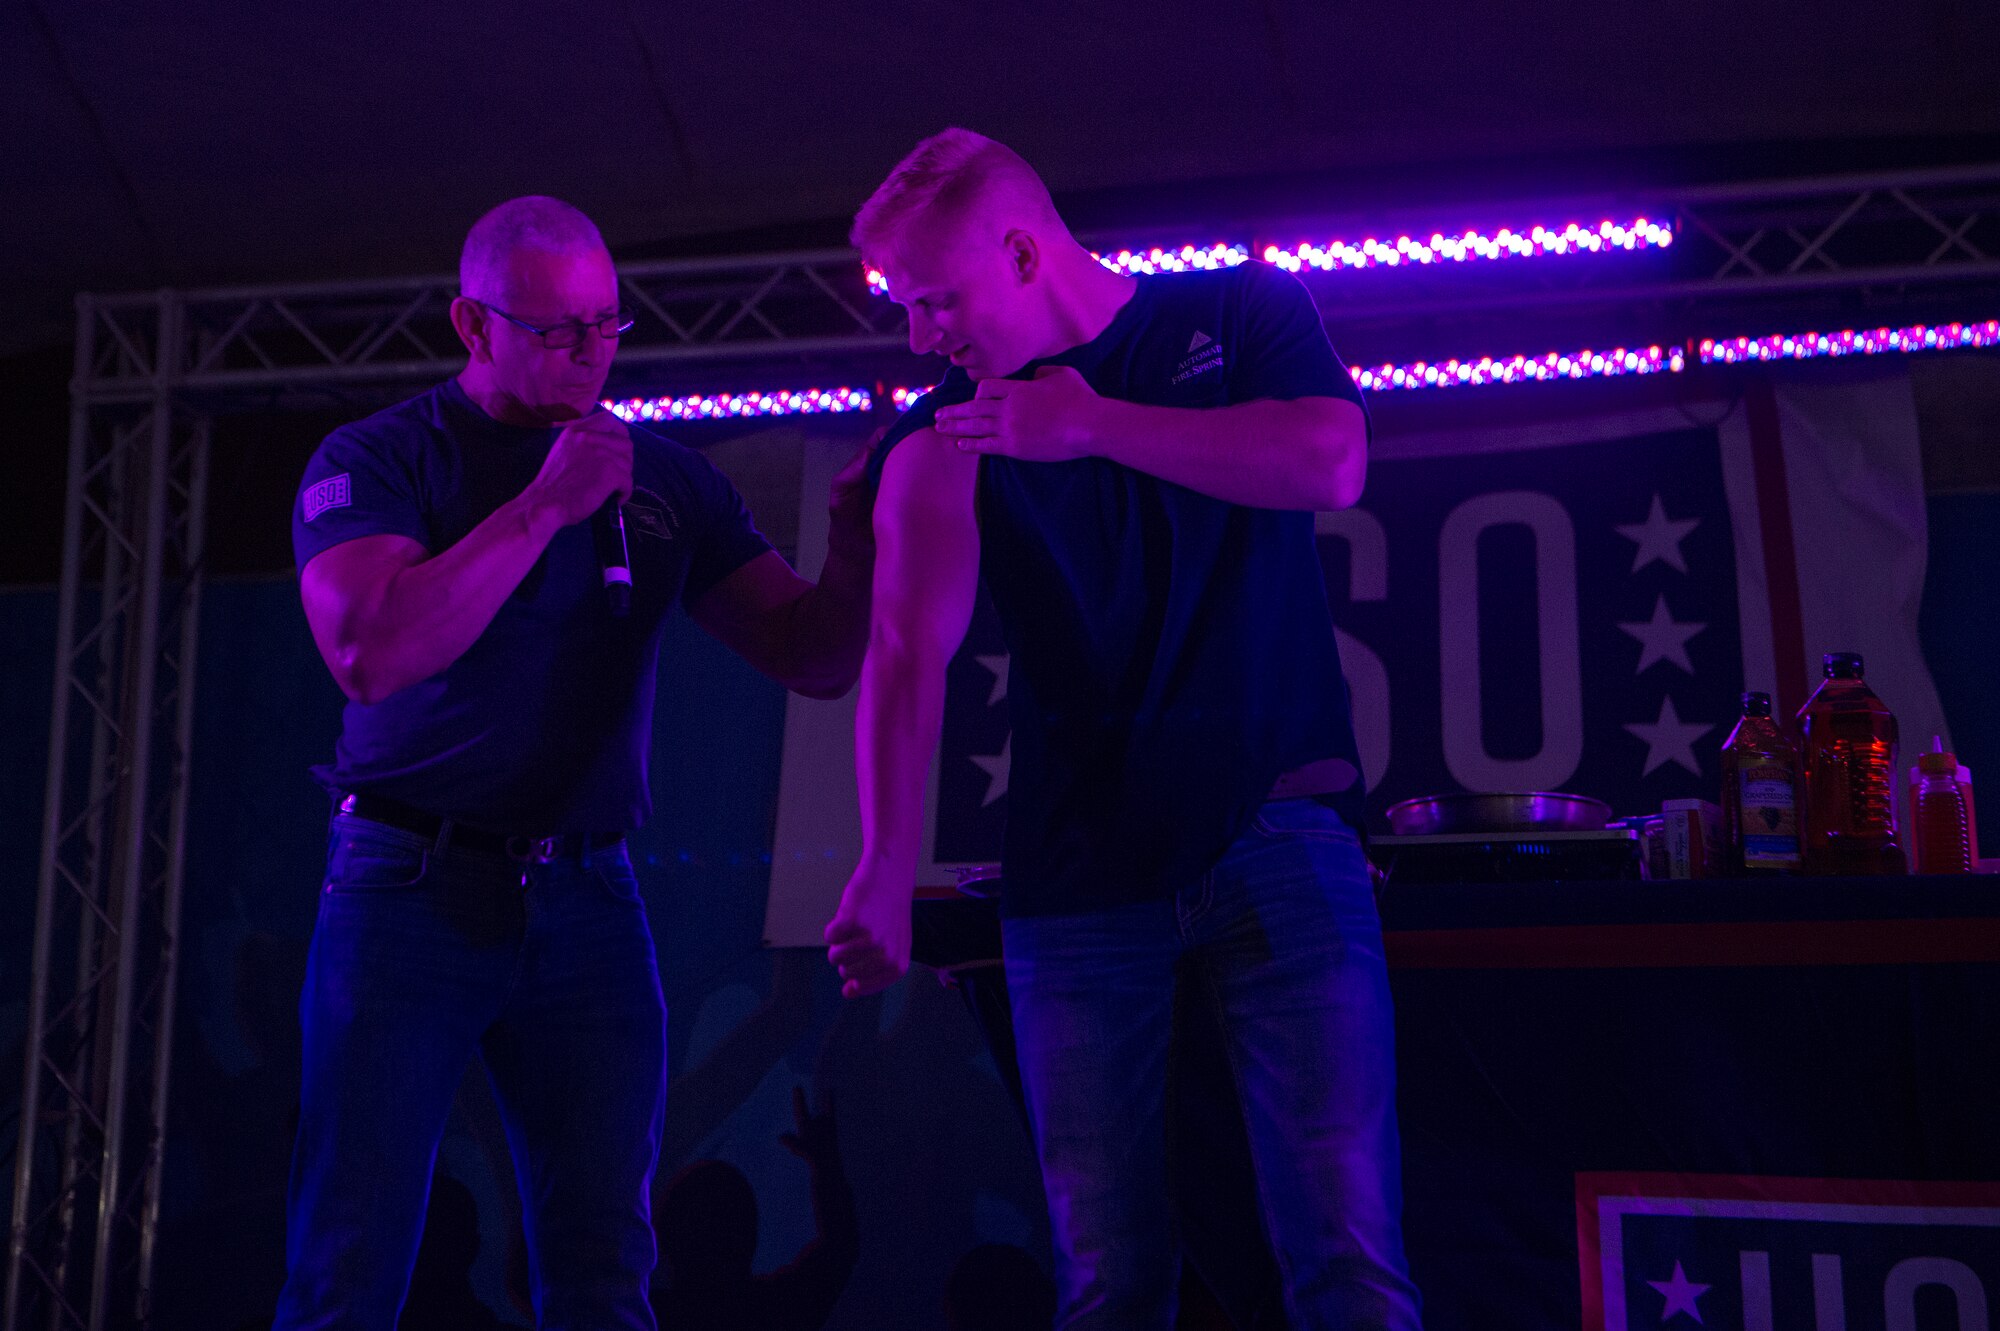 Chef Robert Irvine challenges a service member to complete push-ups faster than he can cook a meal during the United Service Organizations (USO) tour April 1, 2019, at Al Udeid Air Base, Qatar. Irvine shared the stage with music performers and professional athletes during the show.